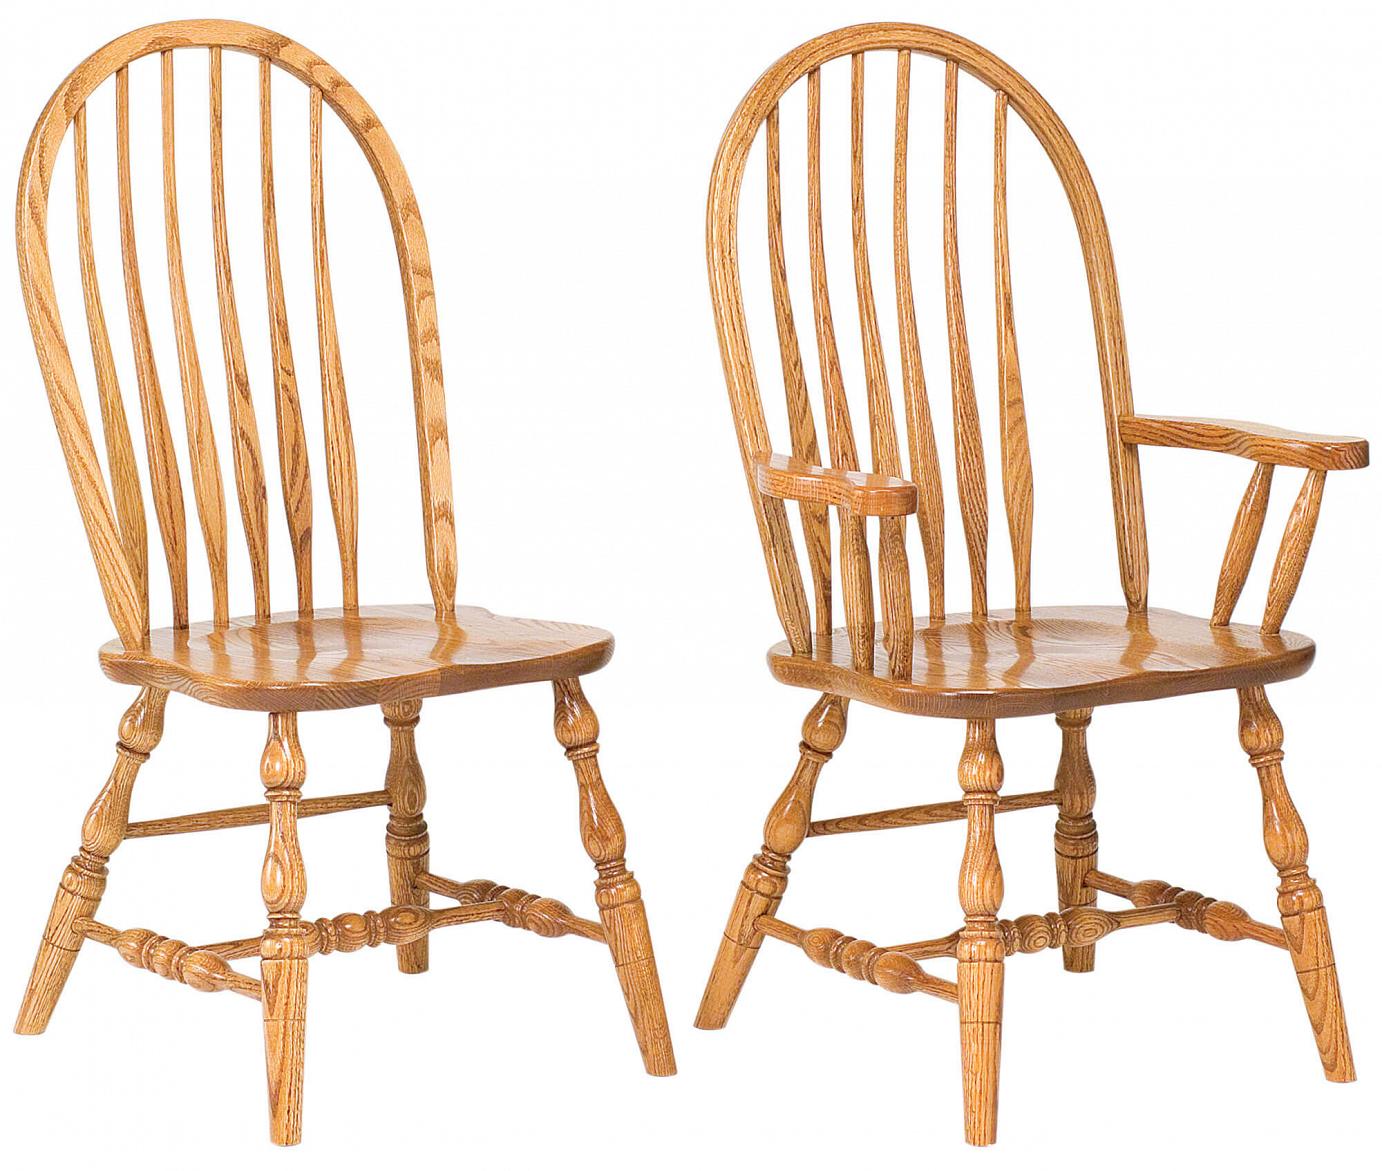 RH Yoder Bent Feather Bow Chairs